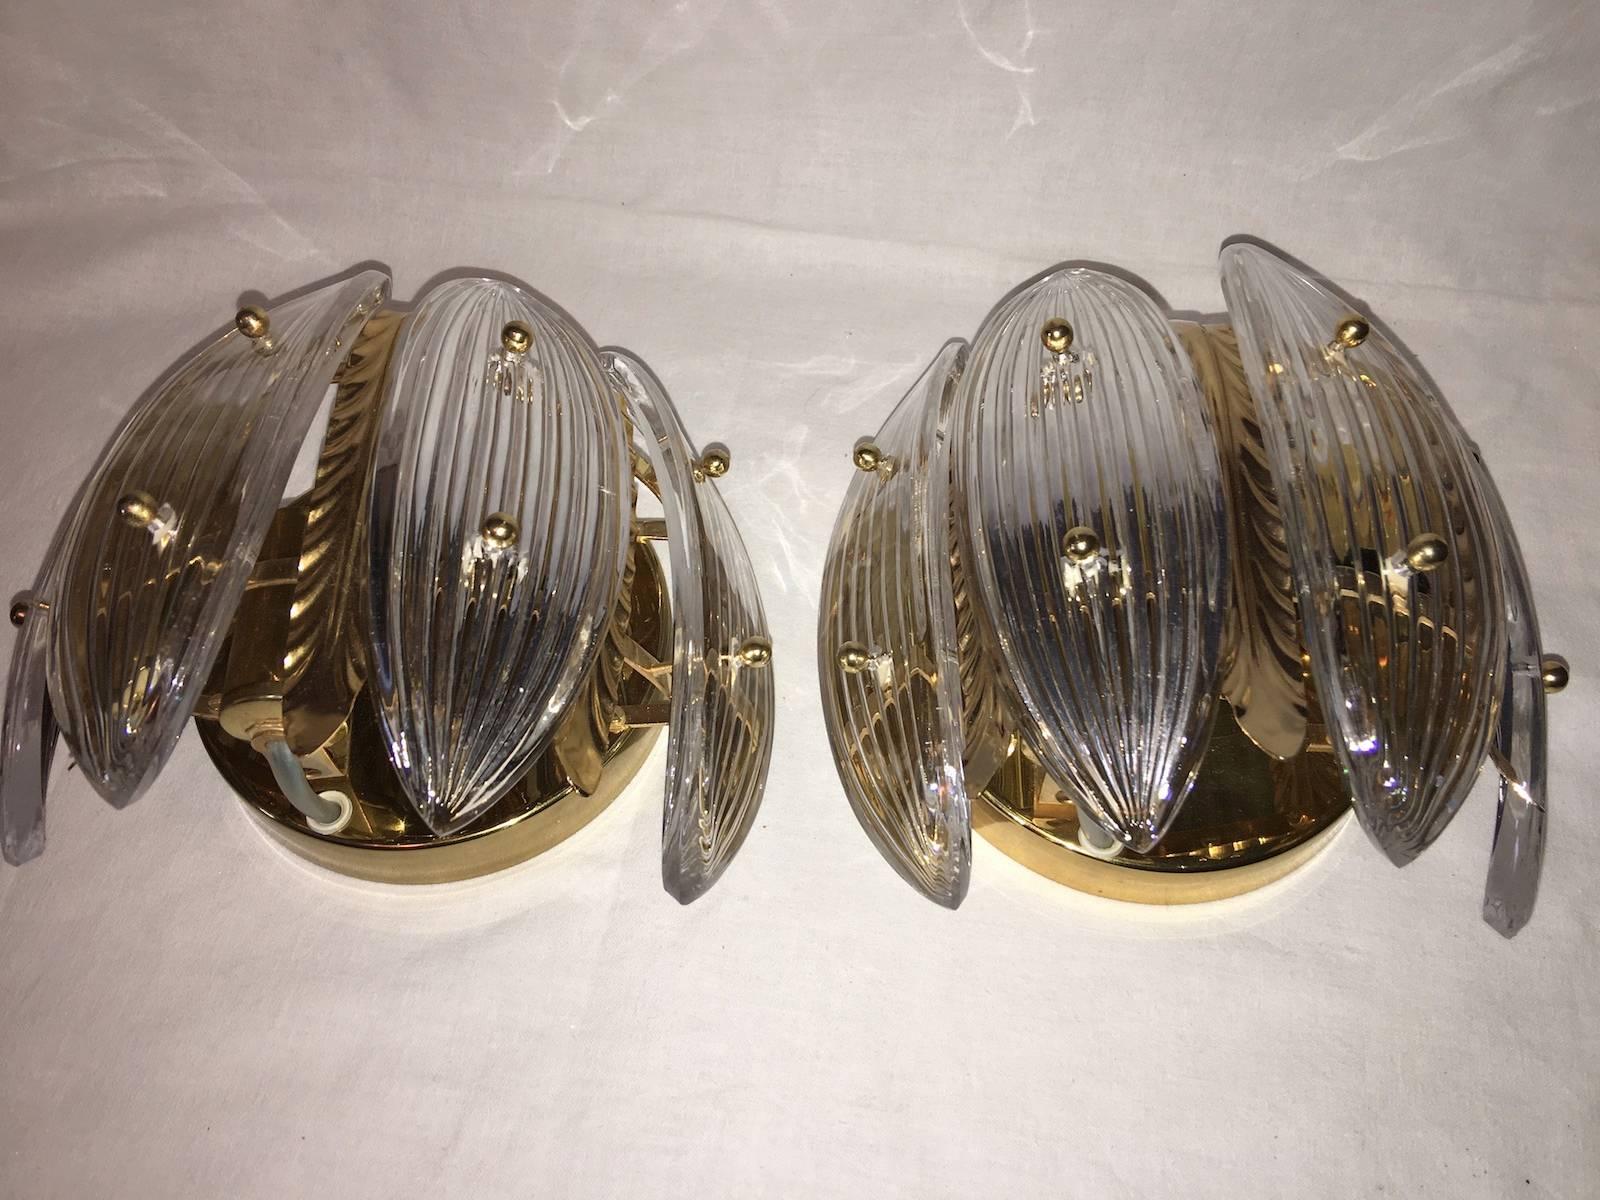 Pair of wall sconces in gold-plated metal and glass. The glasses look like Palm Leafs. Palwa No. 7760. Each Fixture requires two European E14 candelabra bulbs, each bulb up to 40 watts.